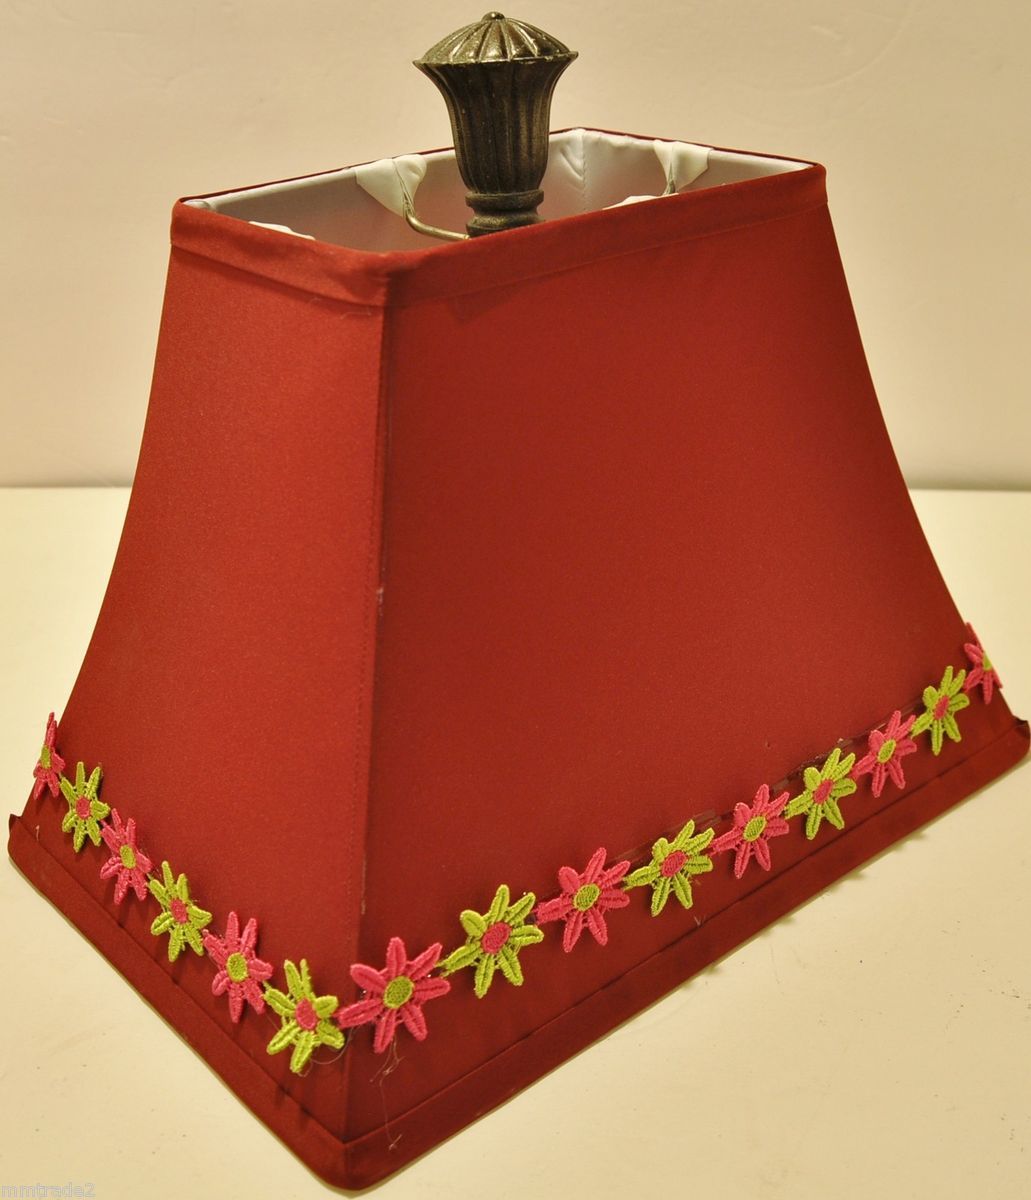   Harp LAMP SHADE Burgundy Fabric Lime Green Hot Pink Flowers FINIAL